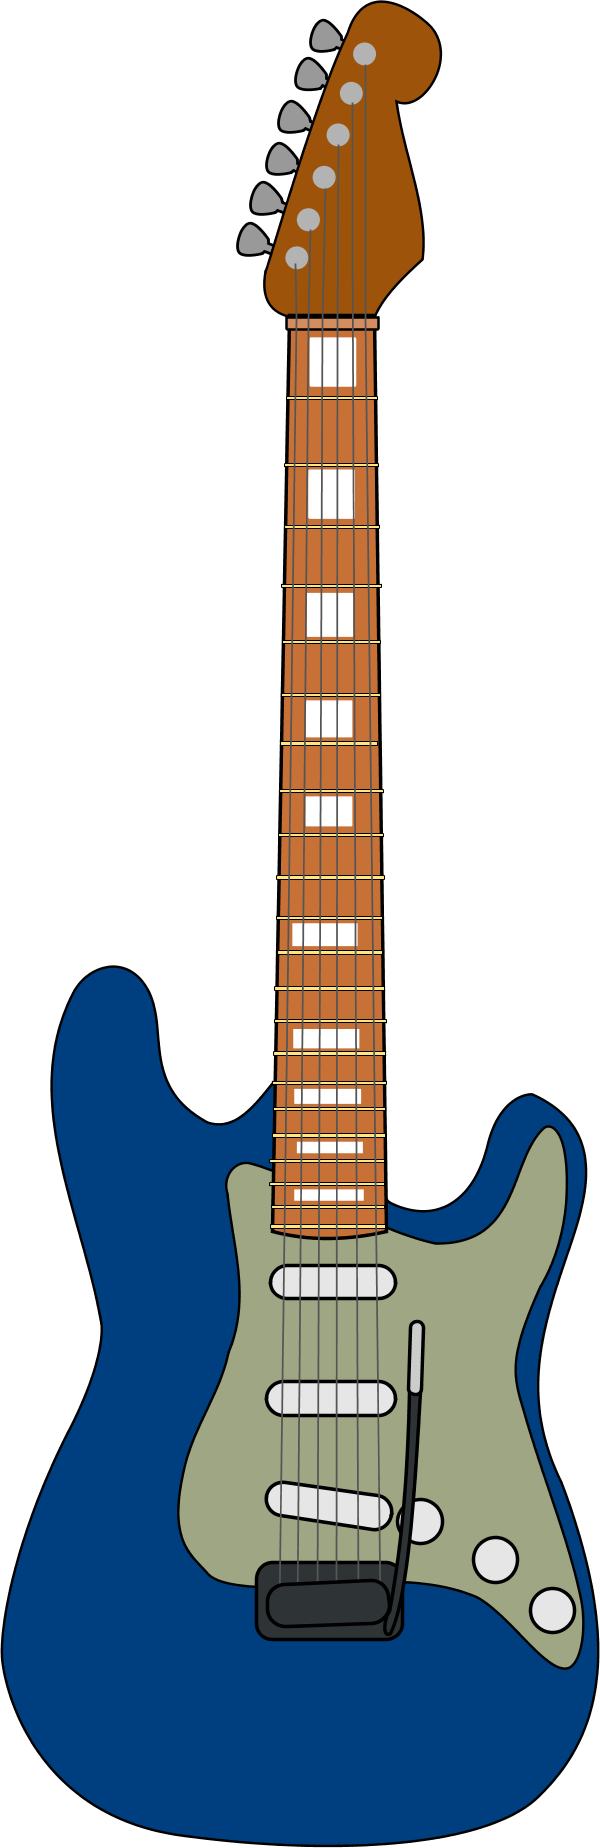 free pink guitar clipart - photo #30